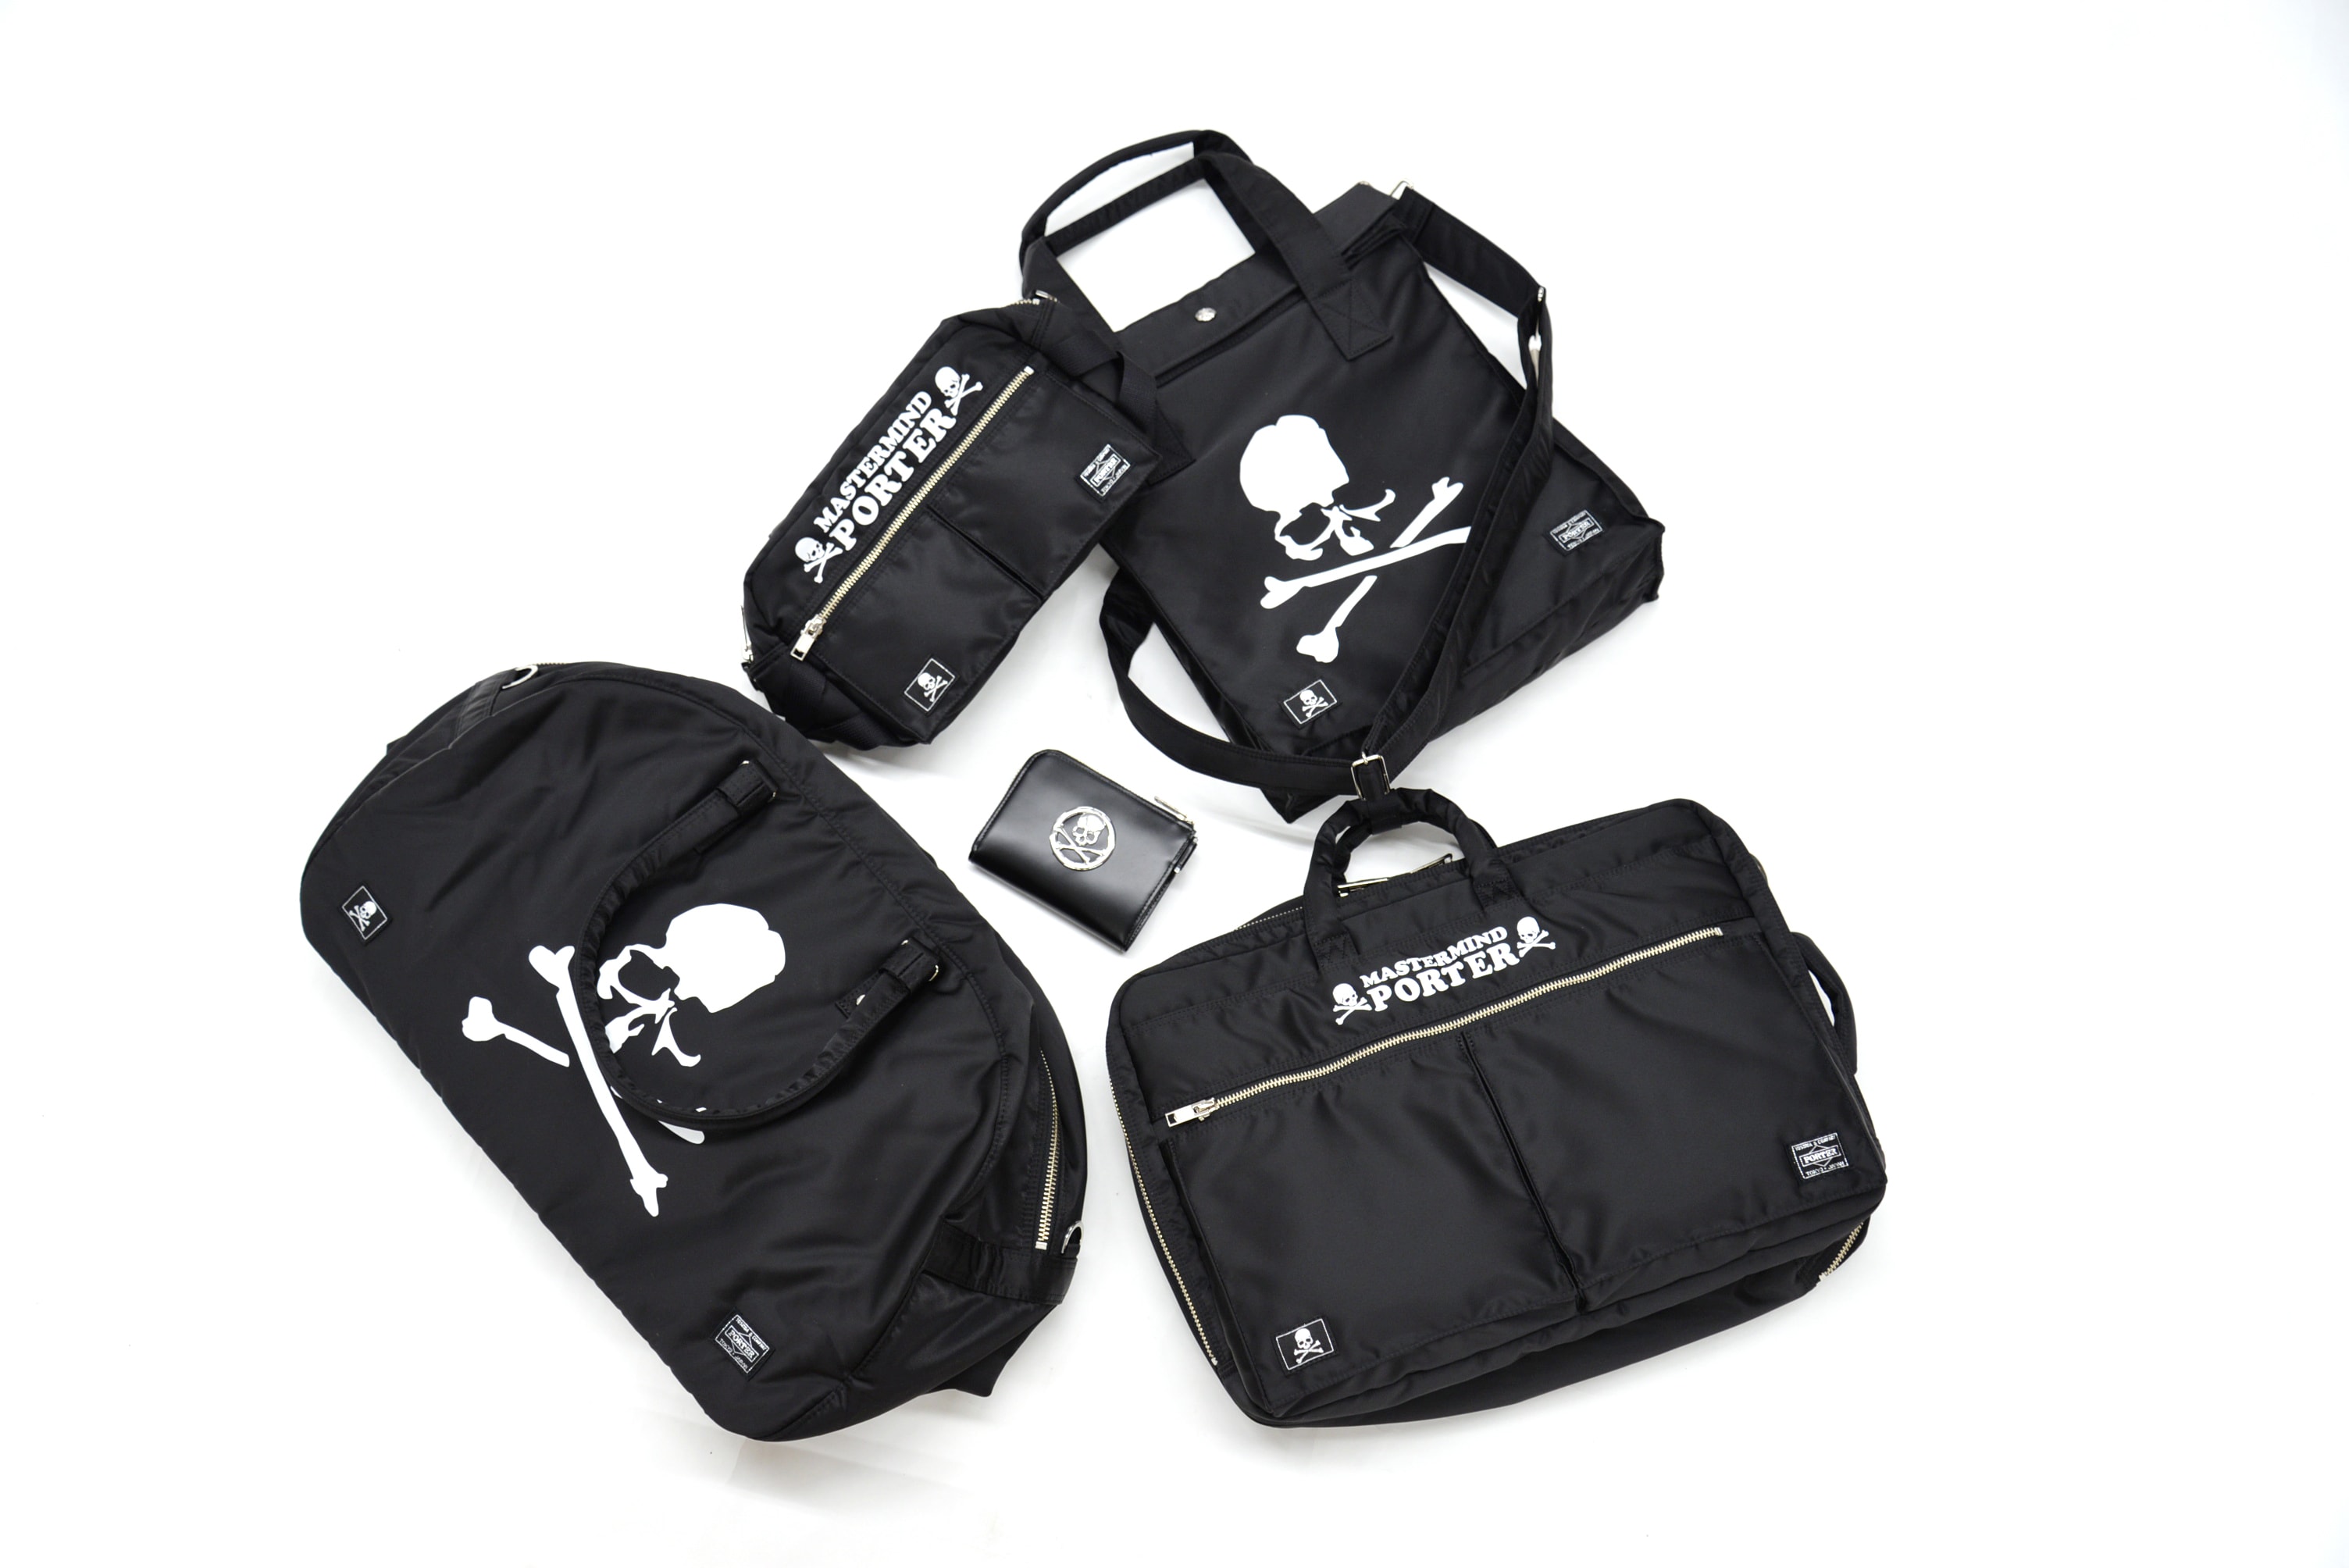 mastermind JAPAN x PORTER 2016 Winter Seoul Exclusive Collection Bags Backpacks Japan Travel